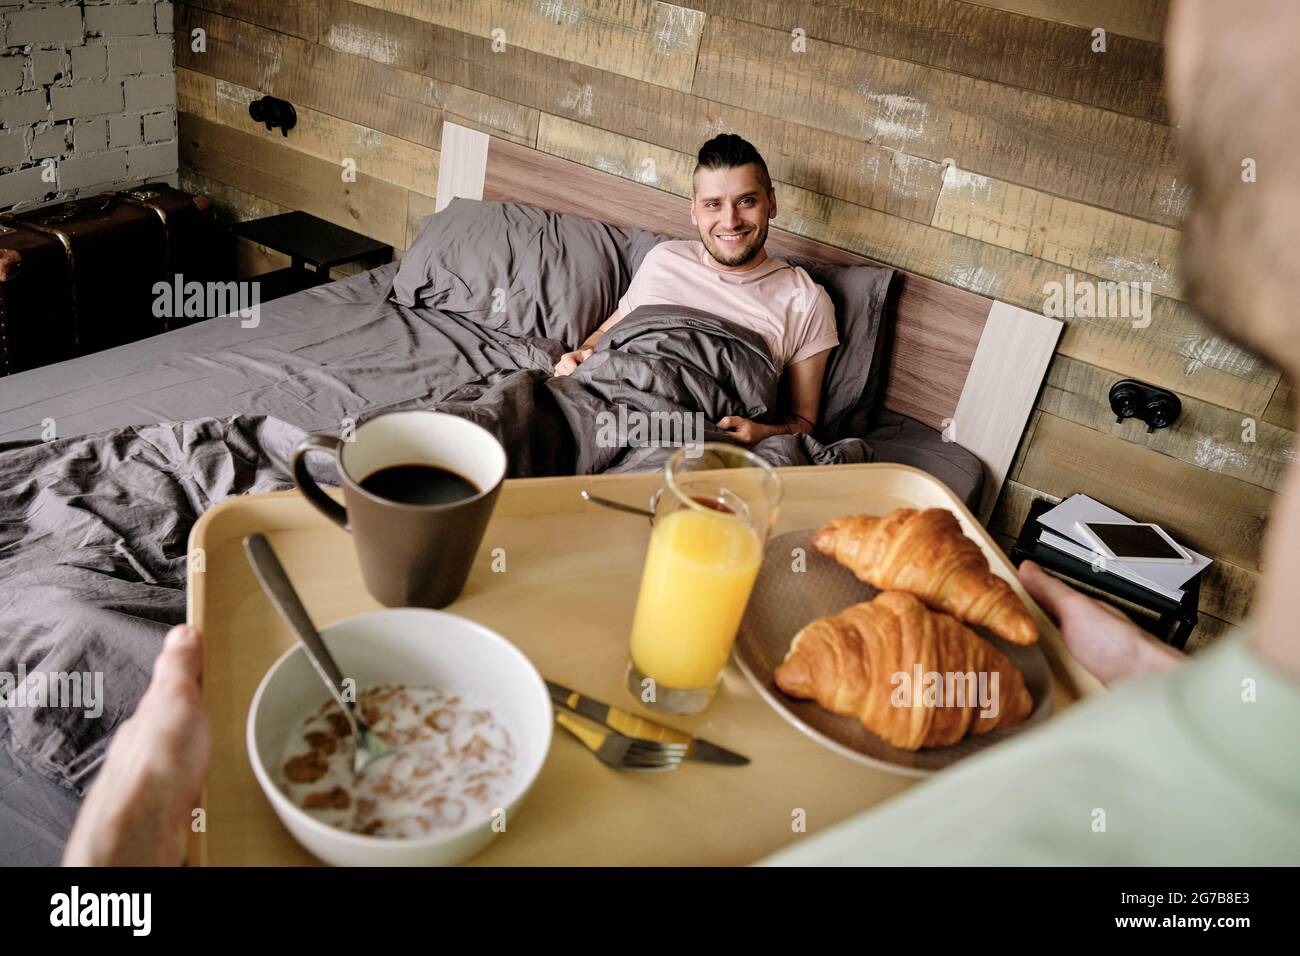 Young man bringing tray with breakfast to his handsome boyfriend in relaxing bed Stock Photo